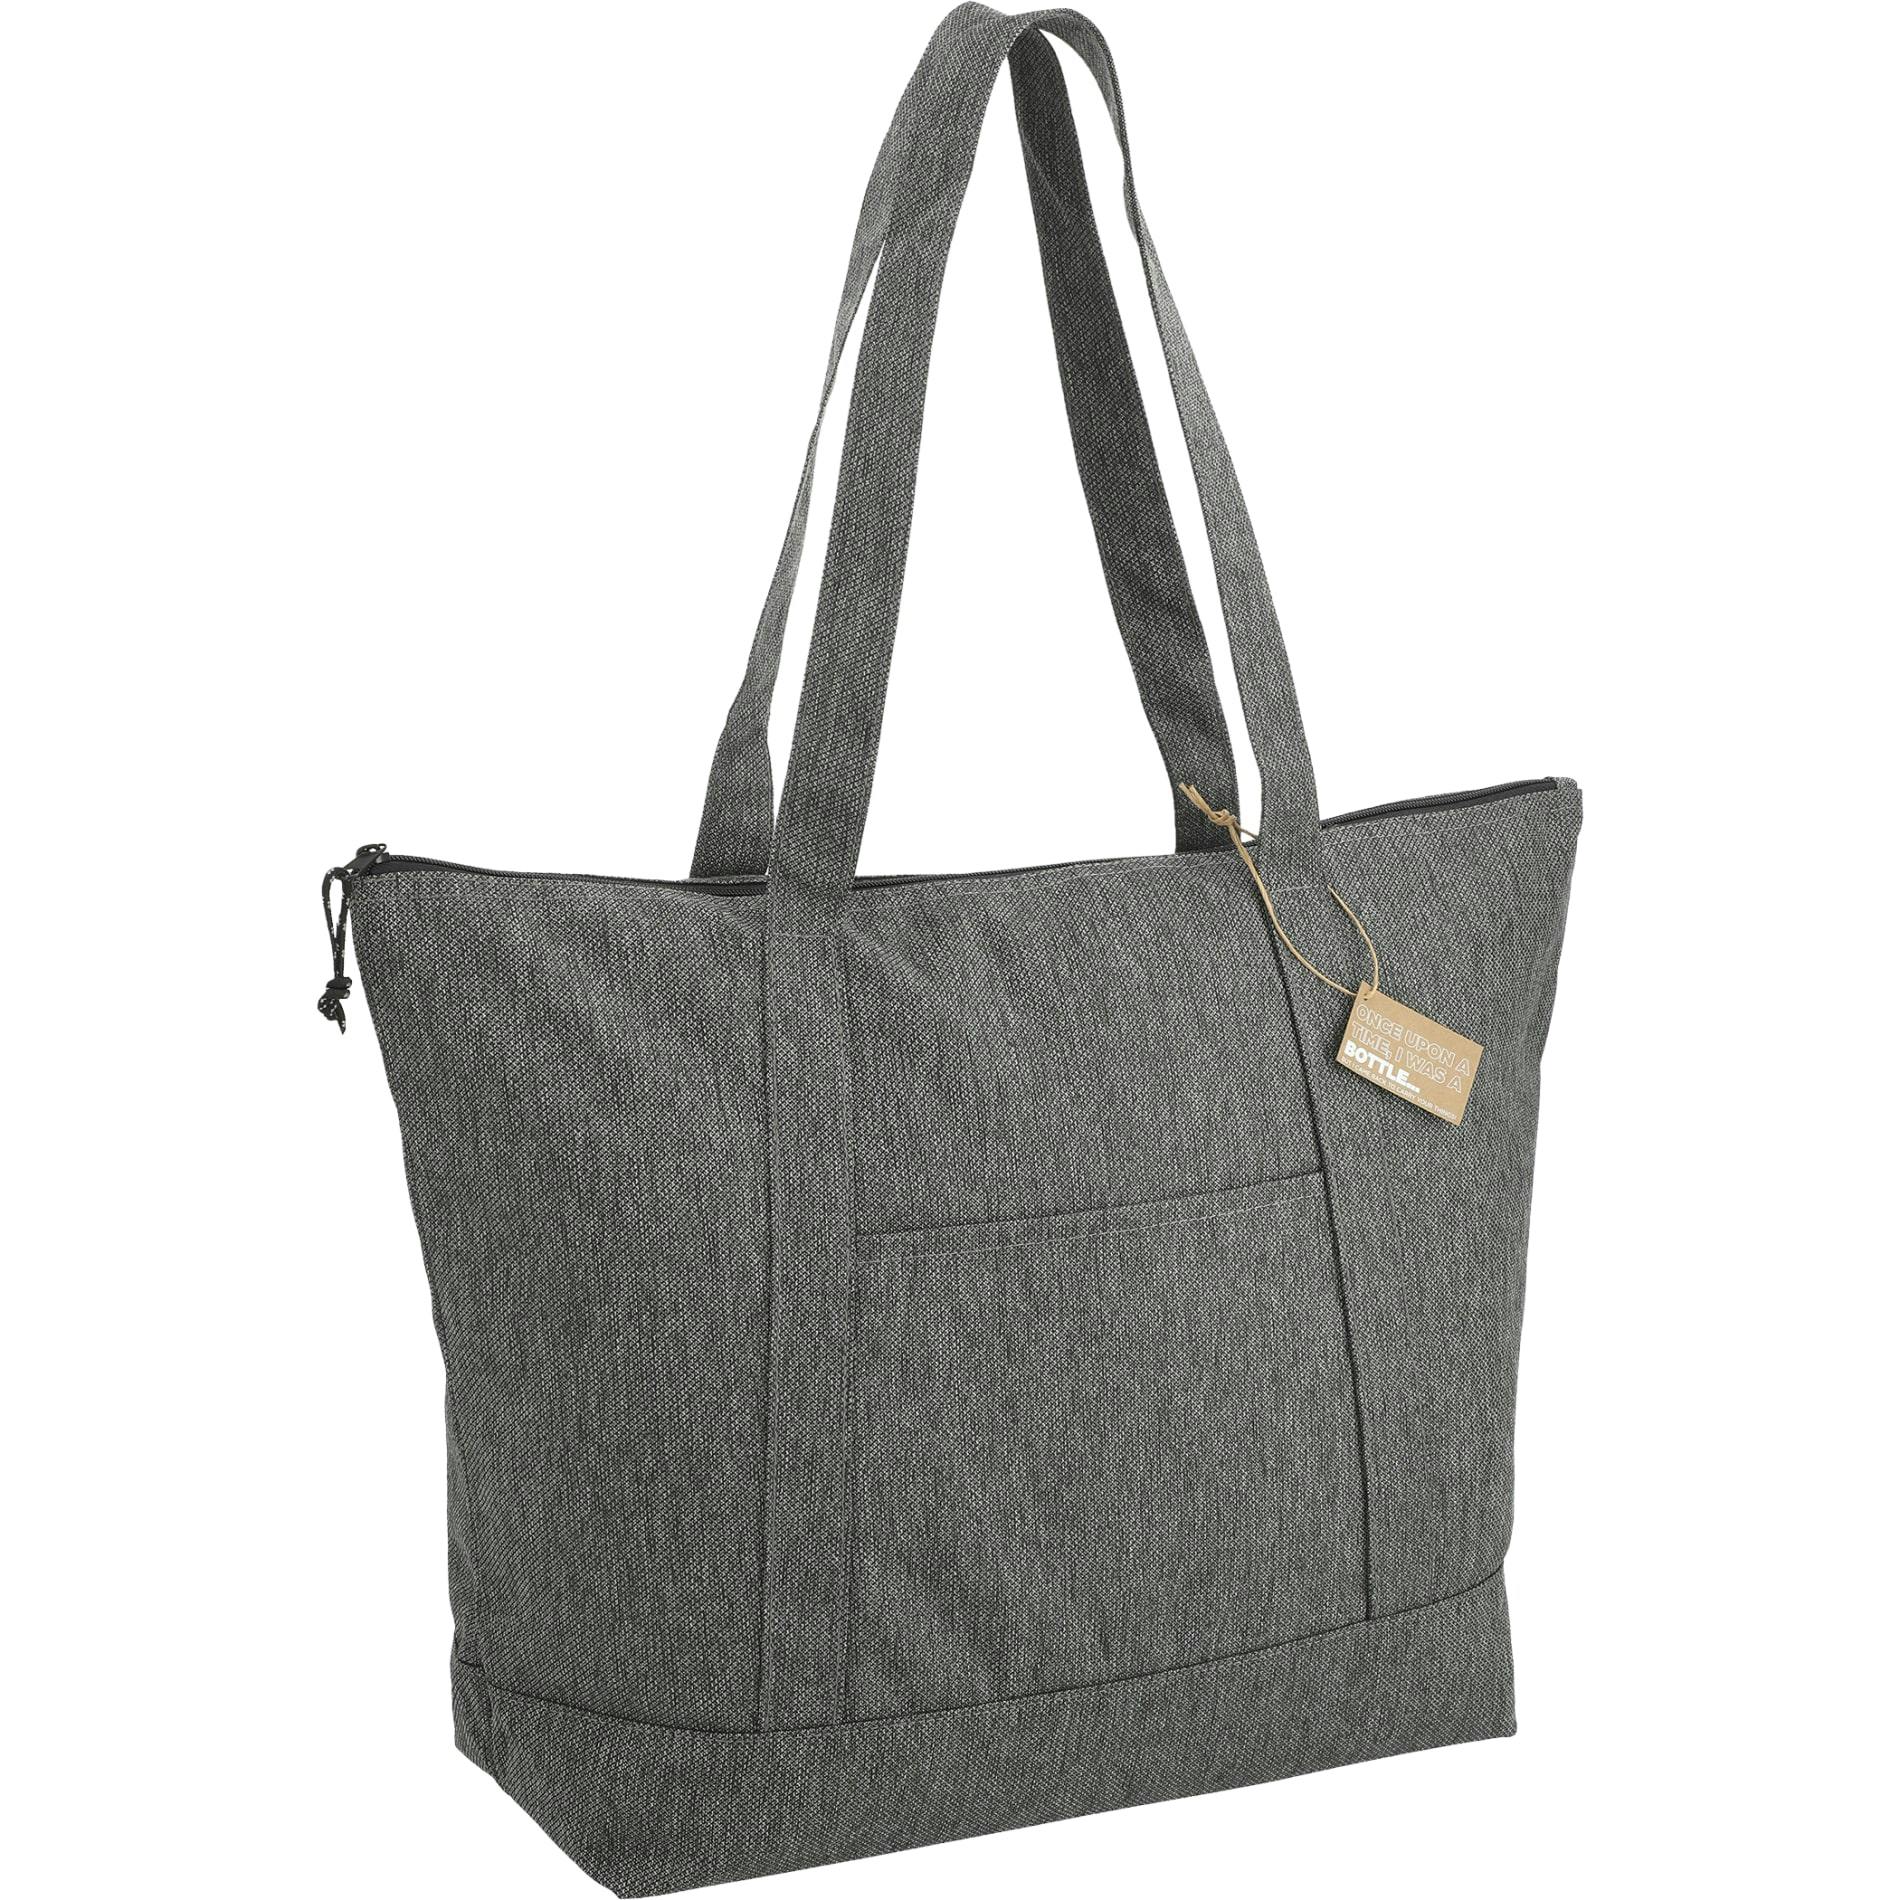 Vila Recycled Boat Tote - additional Image 3